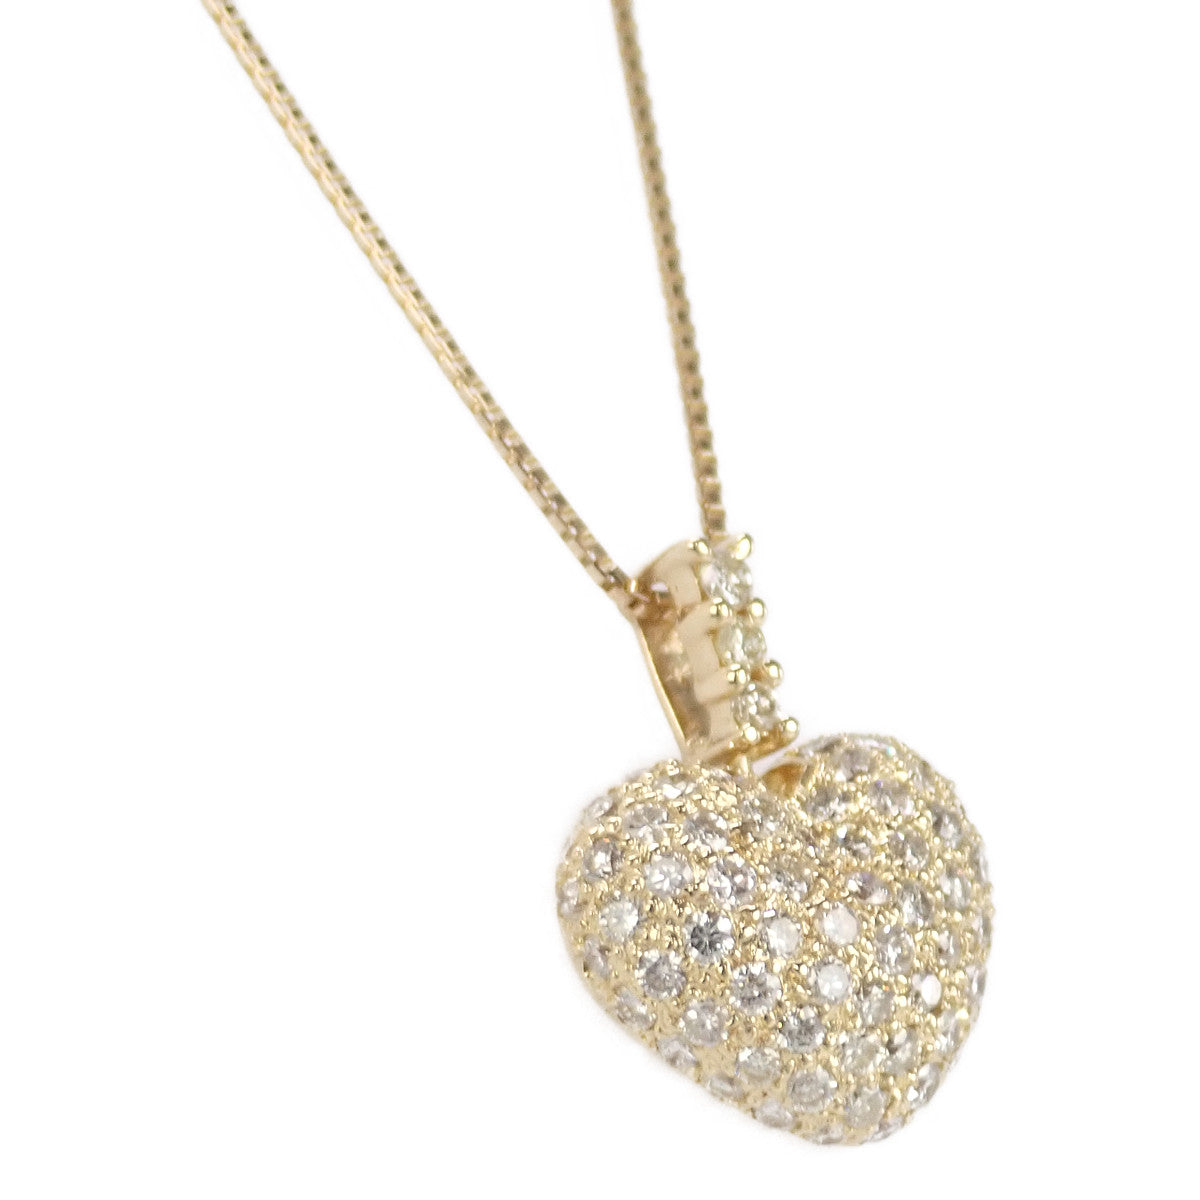 LuxUness  Designer Jewelry Heart Necklace in K18 Yellow Gold with Diamond 1.09ct for Ladies - Gold in Excellent condition